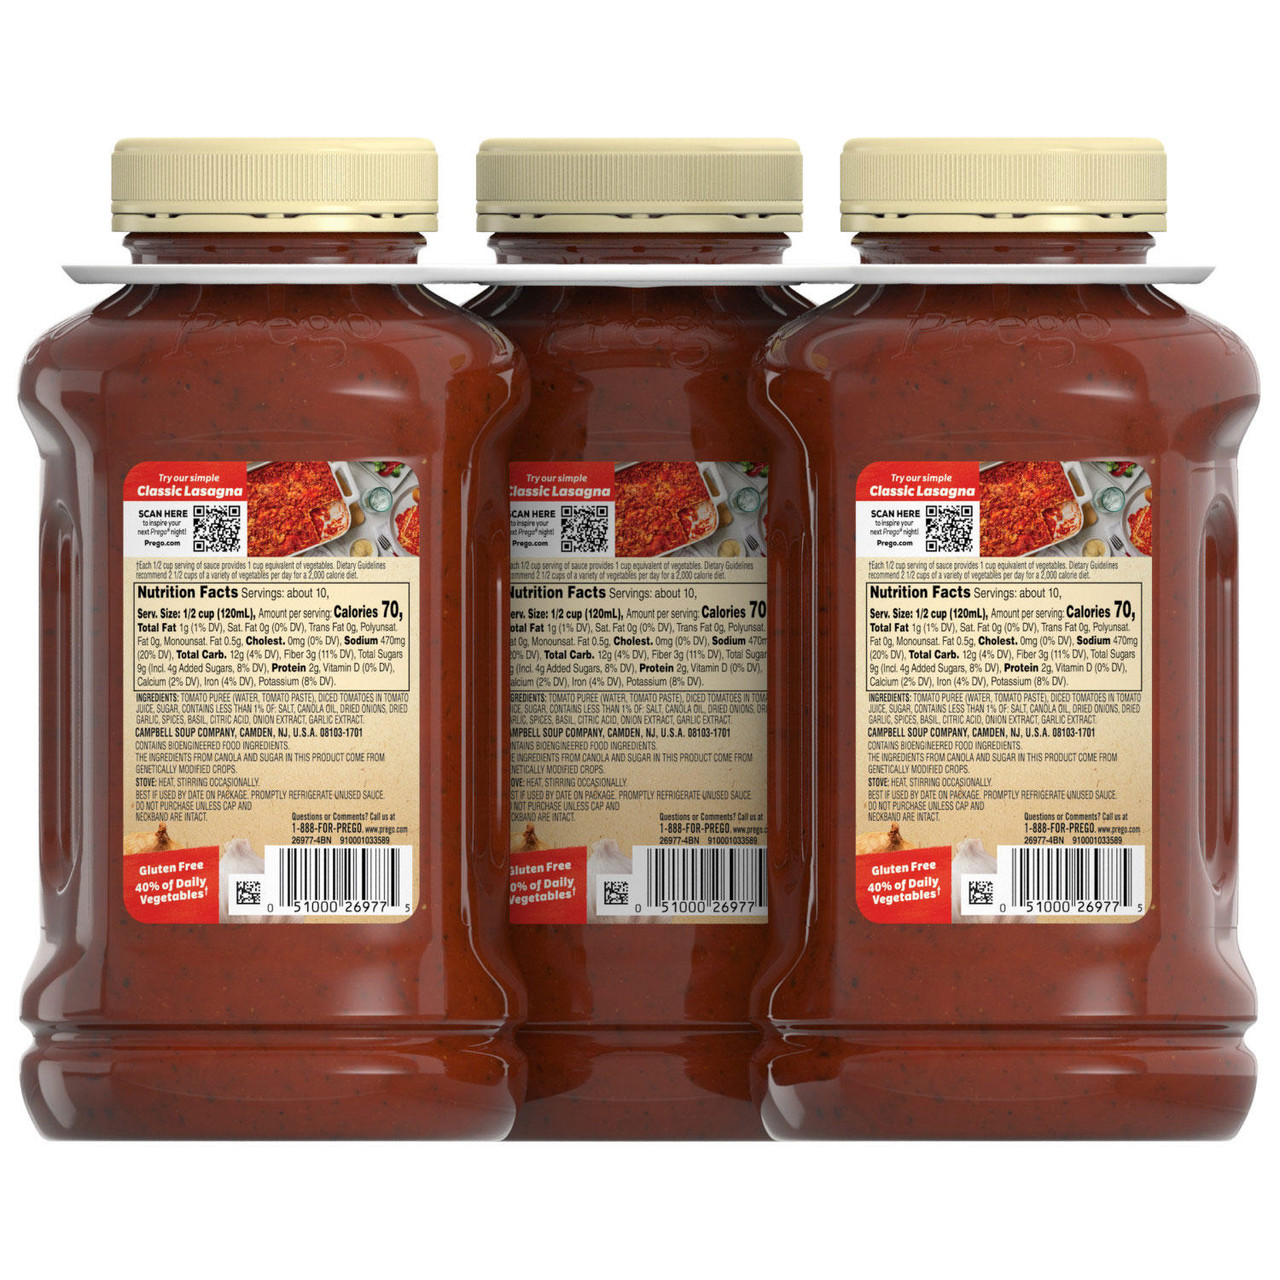 Prego Traditional Italian Sauce (45 oz., 3 pk.) - [From 49.00 - Choose pk Qty ] - *Ships from Miami